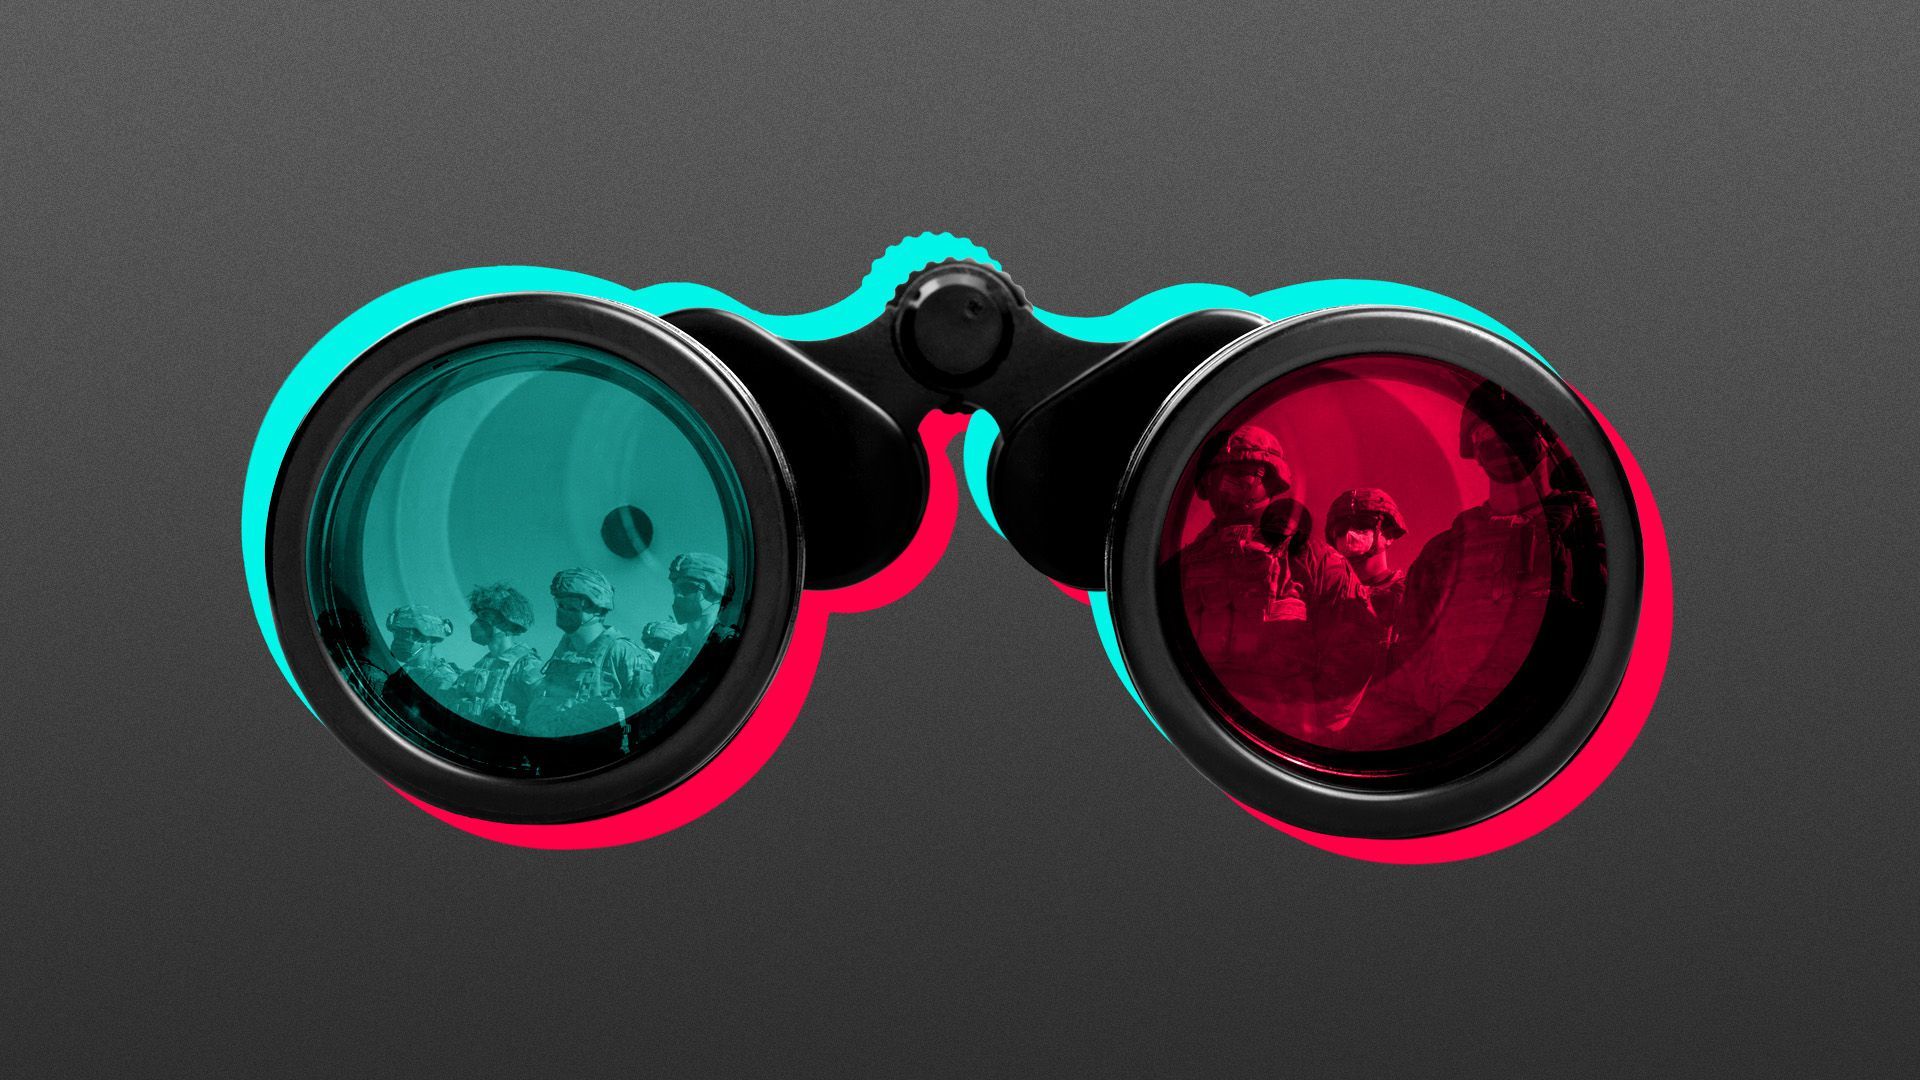 Illustration of a pair of binoculars showing soldiers in the lens and featuring tik tok colors